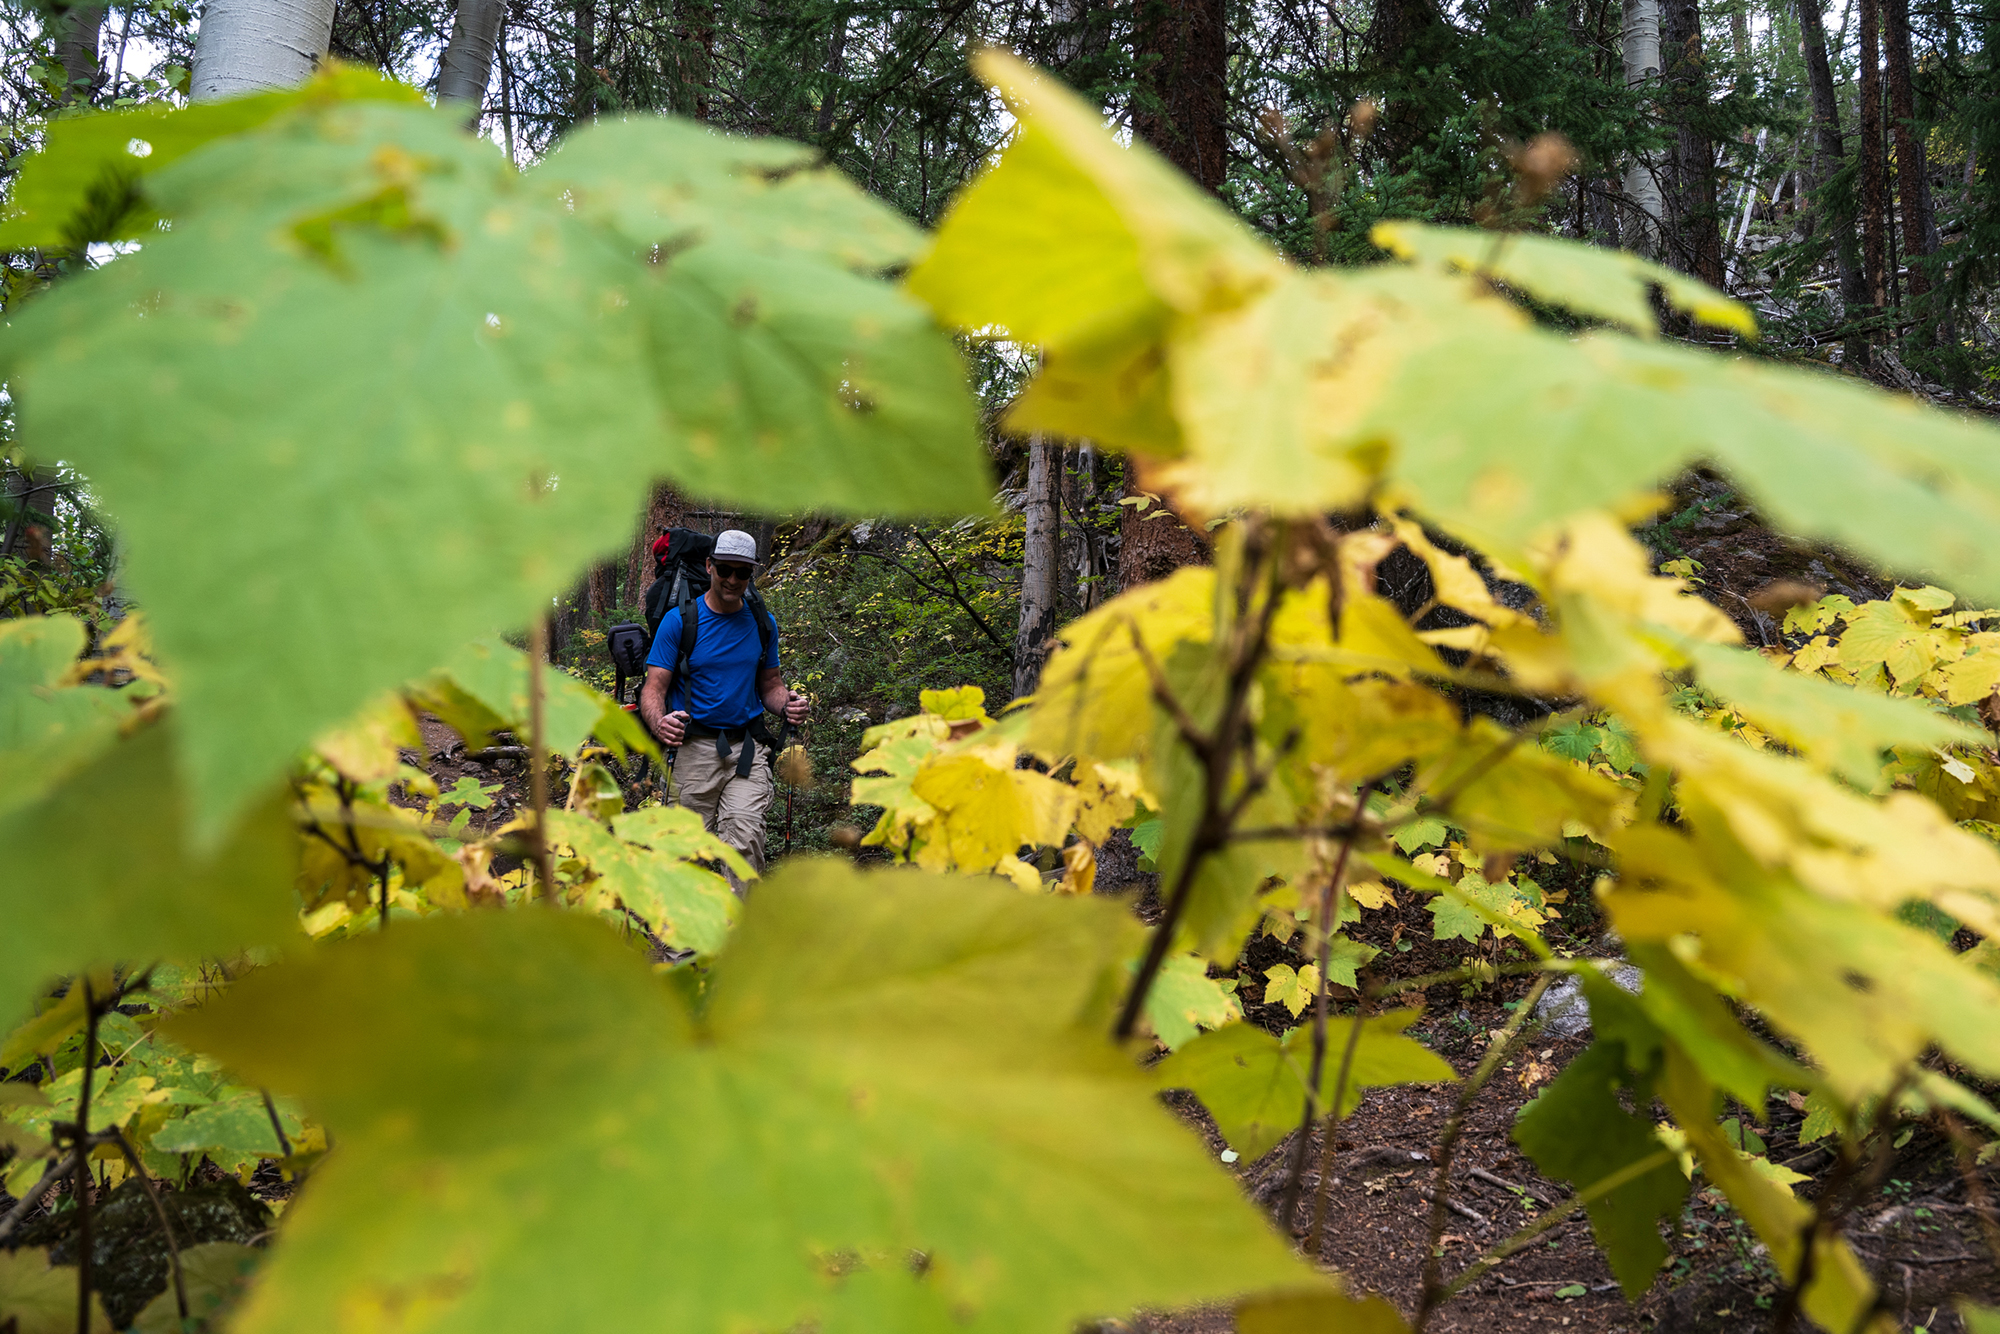 Yellow leaves in foreground in close focus with man hiking in blue shirt seen through the gaps within the leaves